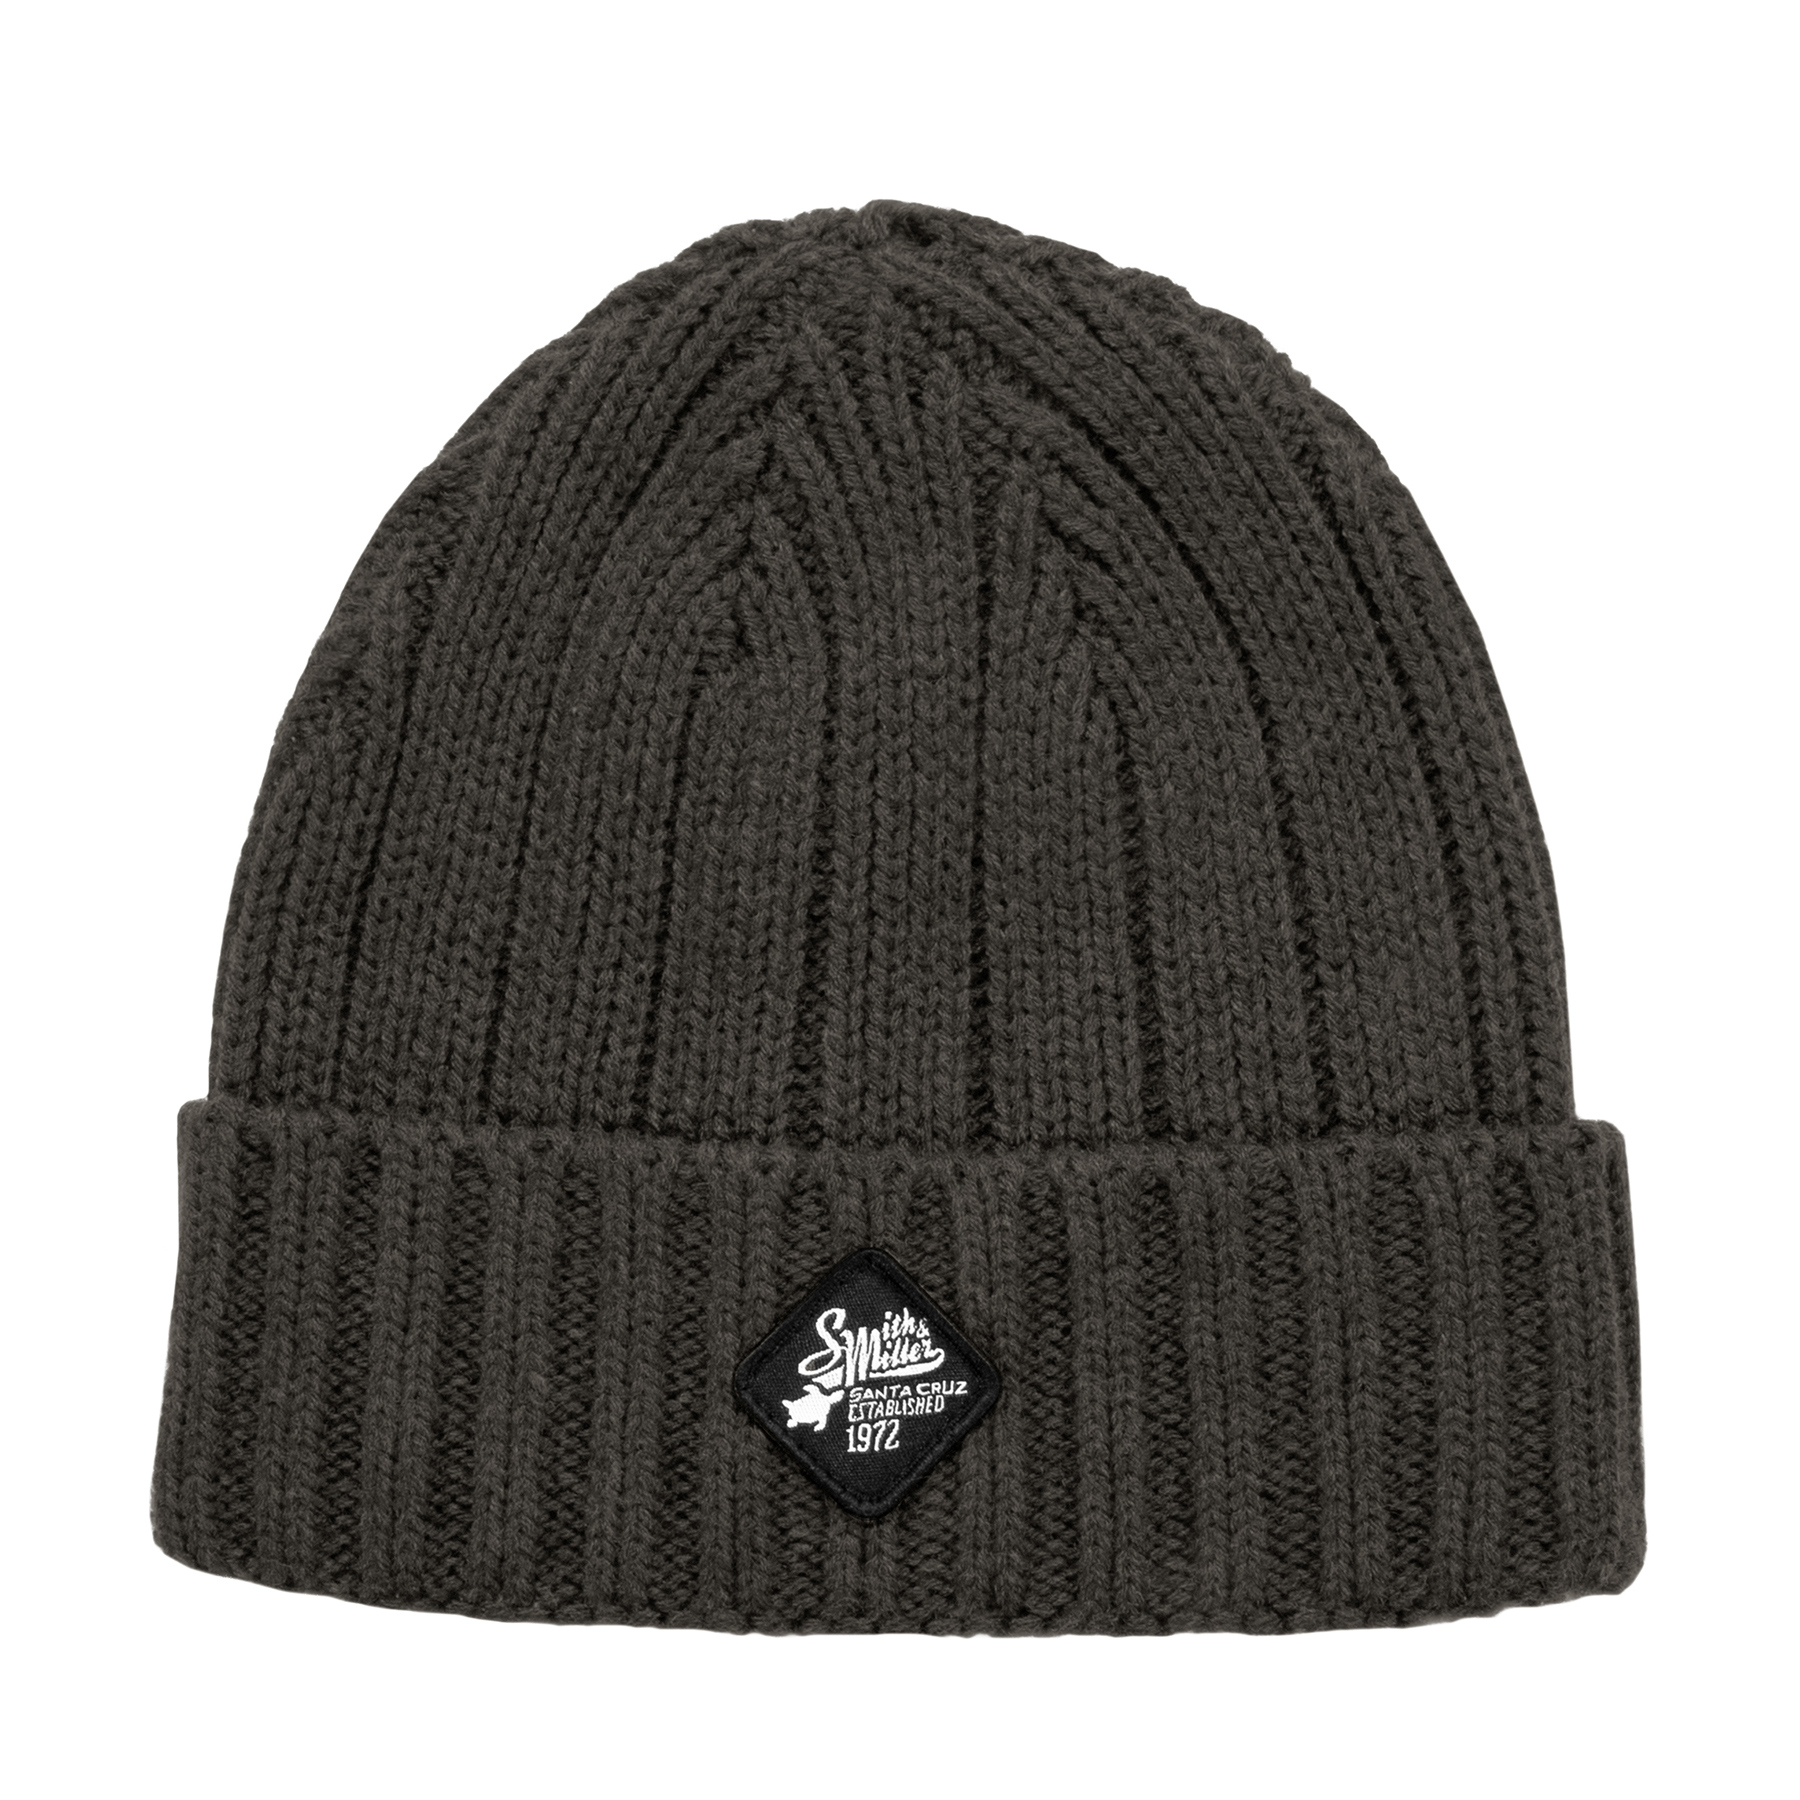 Smith & Miller Liberty Beanie, charcoal